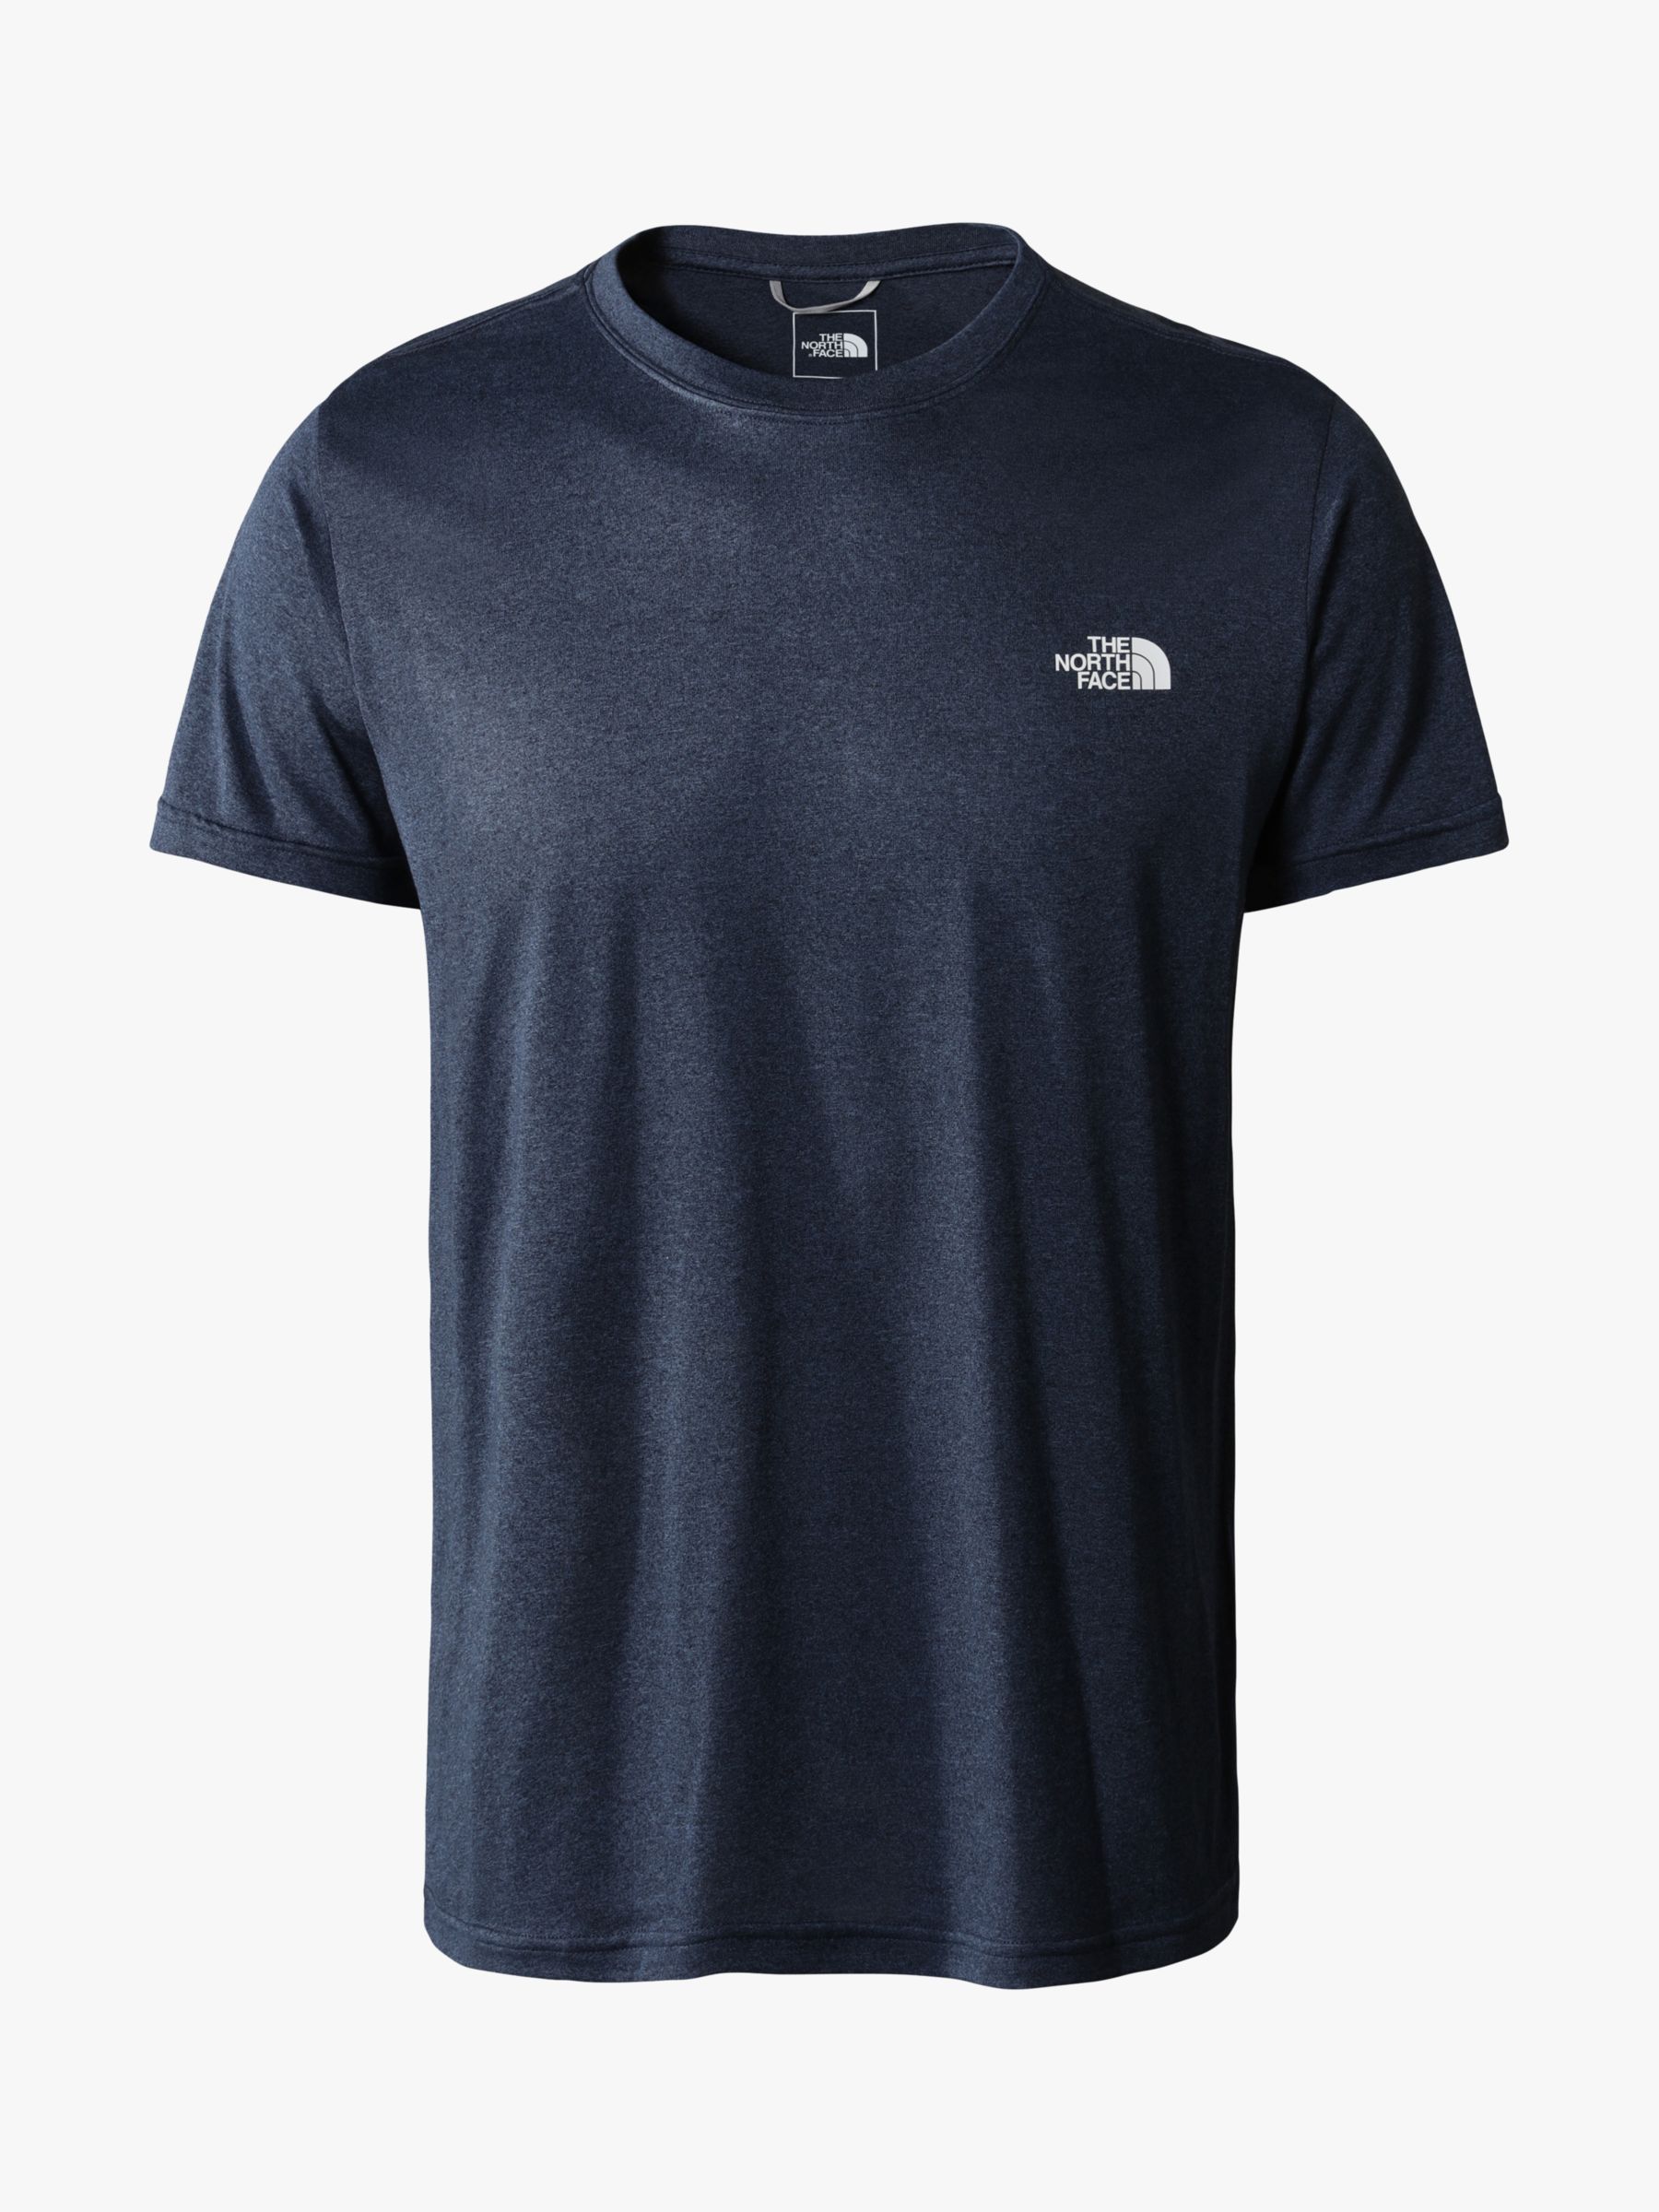 Buy The North Face Reaxion Amp T-Shirt, Blue Heather Online at johnlewis.com